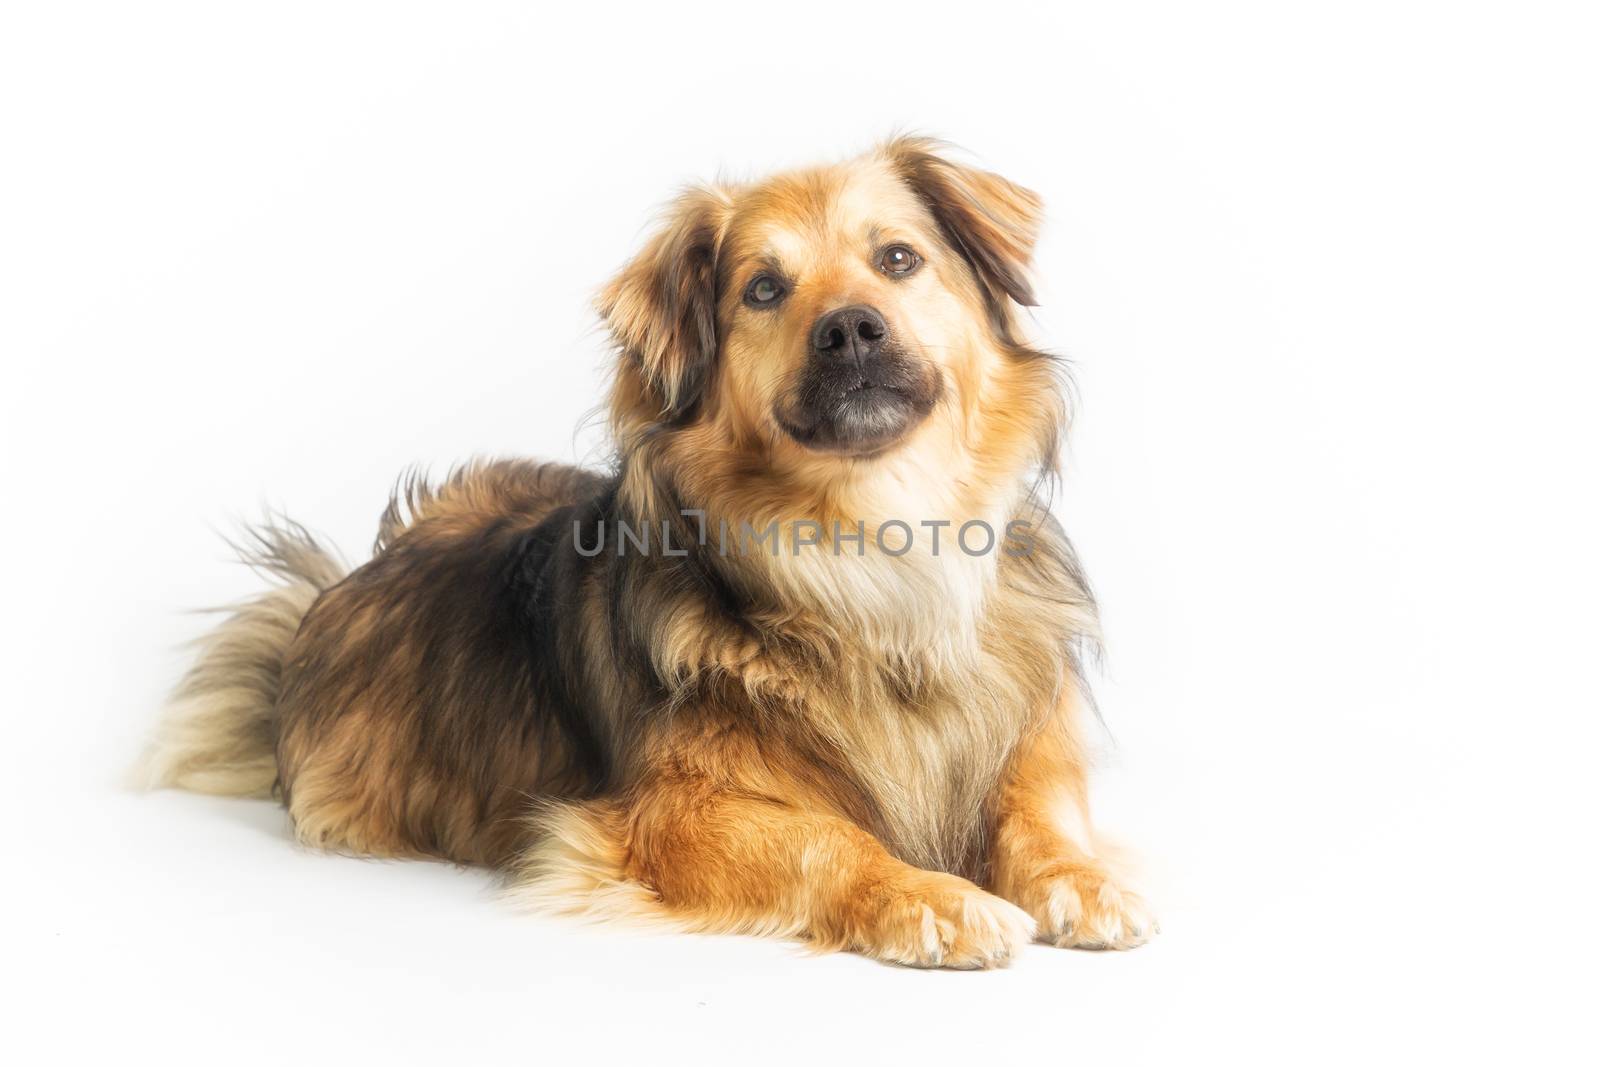 Lying dog in studio with white background by sandra_fotodesign